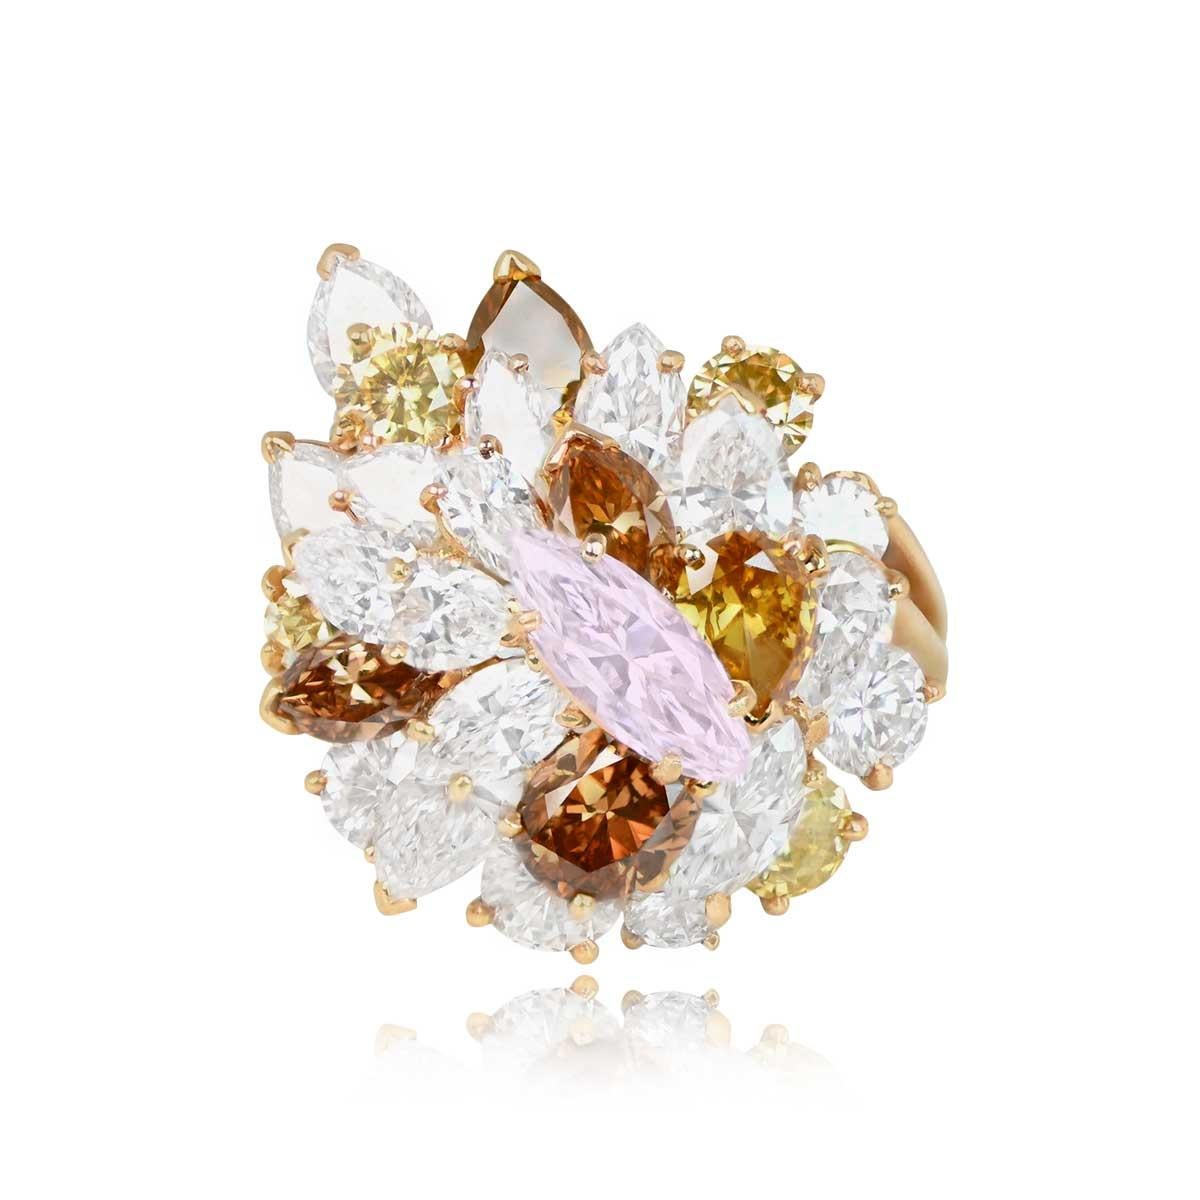 This stunning Oscar Heyman cluster ring features a natural light pink marquise-shaped diamond at its center, weighing approximately 0.75 carats with VS1 clarity. Adorned with a cluster of round brilliant cut, pear-shaped, and marquise-shaped